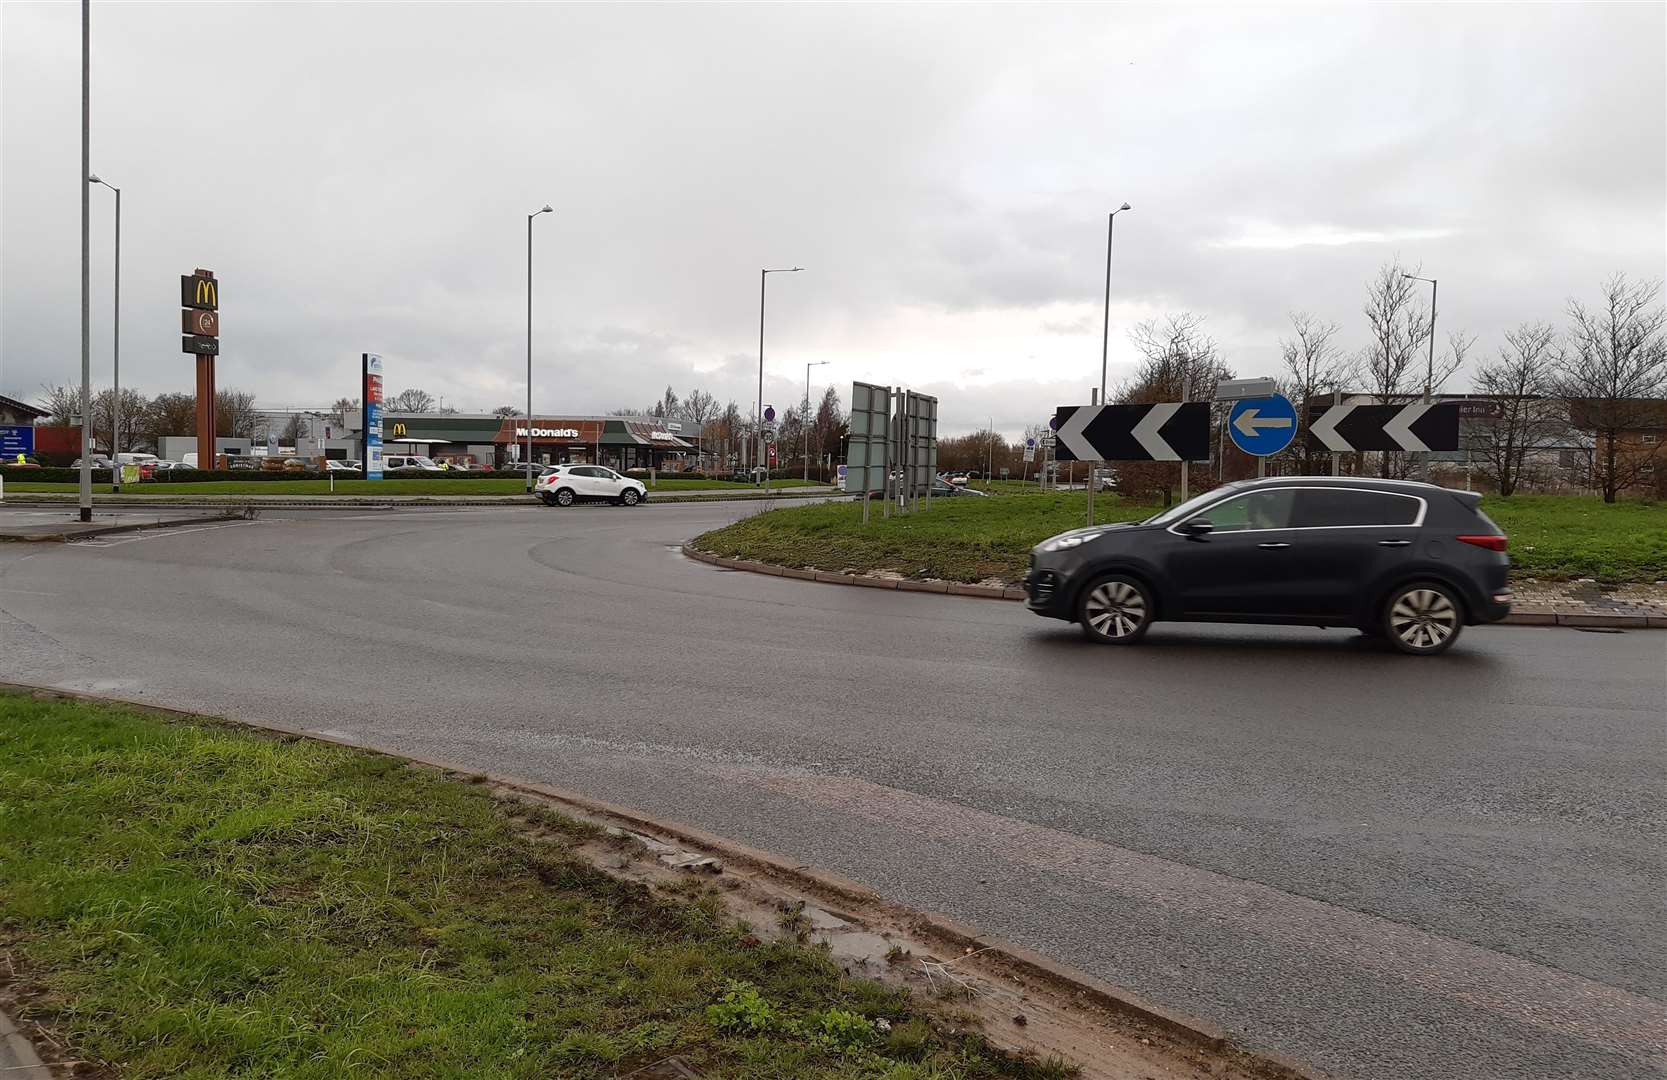 The Orbital Park roundabout is one of the busiest in Ashford